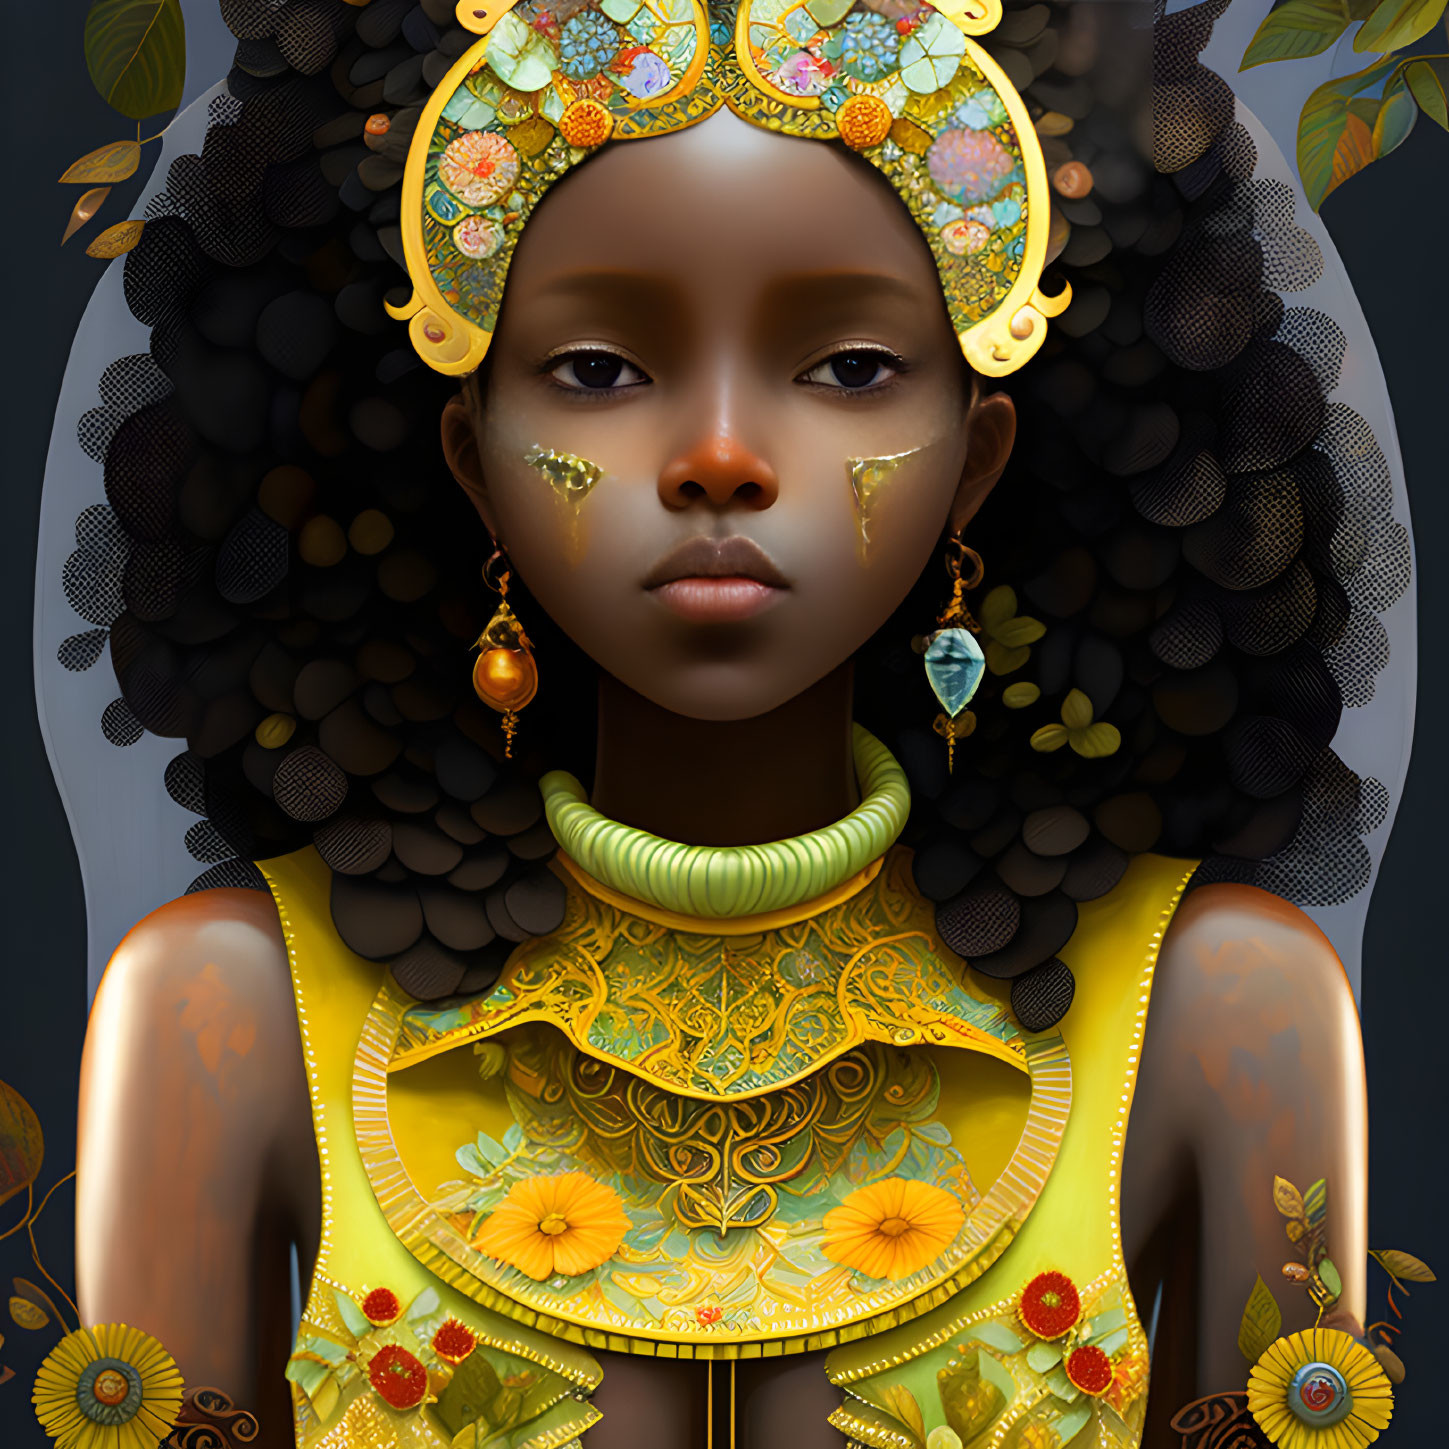 Detailed illustration of girl in ornate golden headgear, vibrant yellow attire, green jewelry, and face